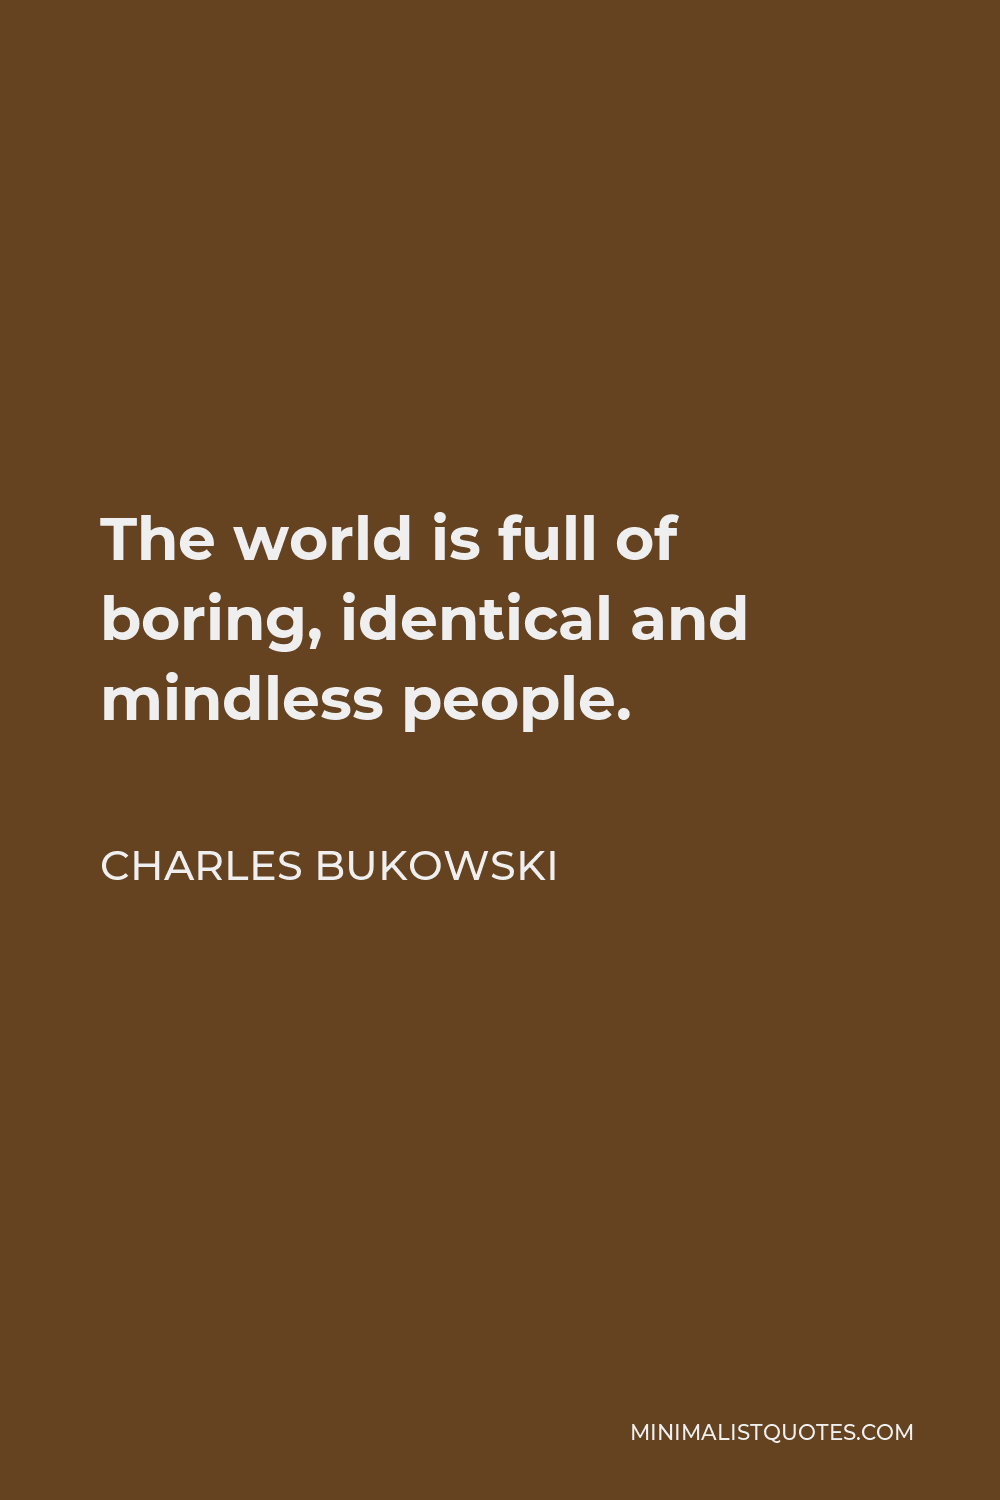 Charles Bukowski Quote: The world is full of boring, identical and mindless  people.